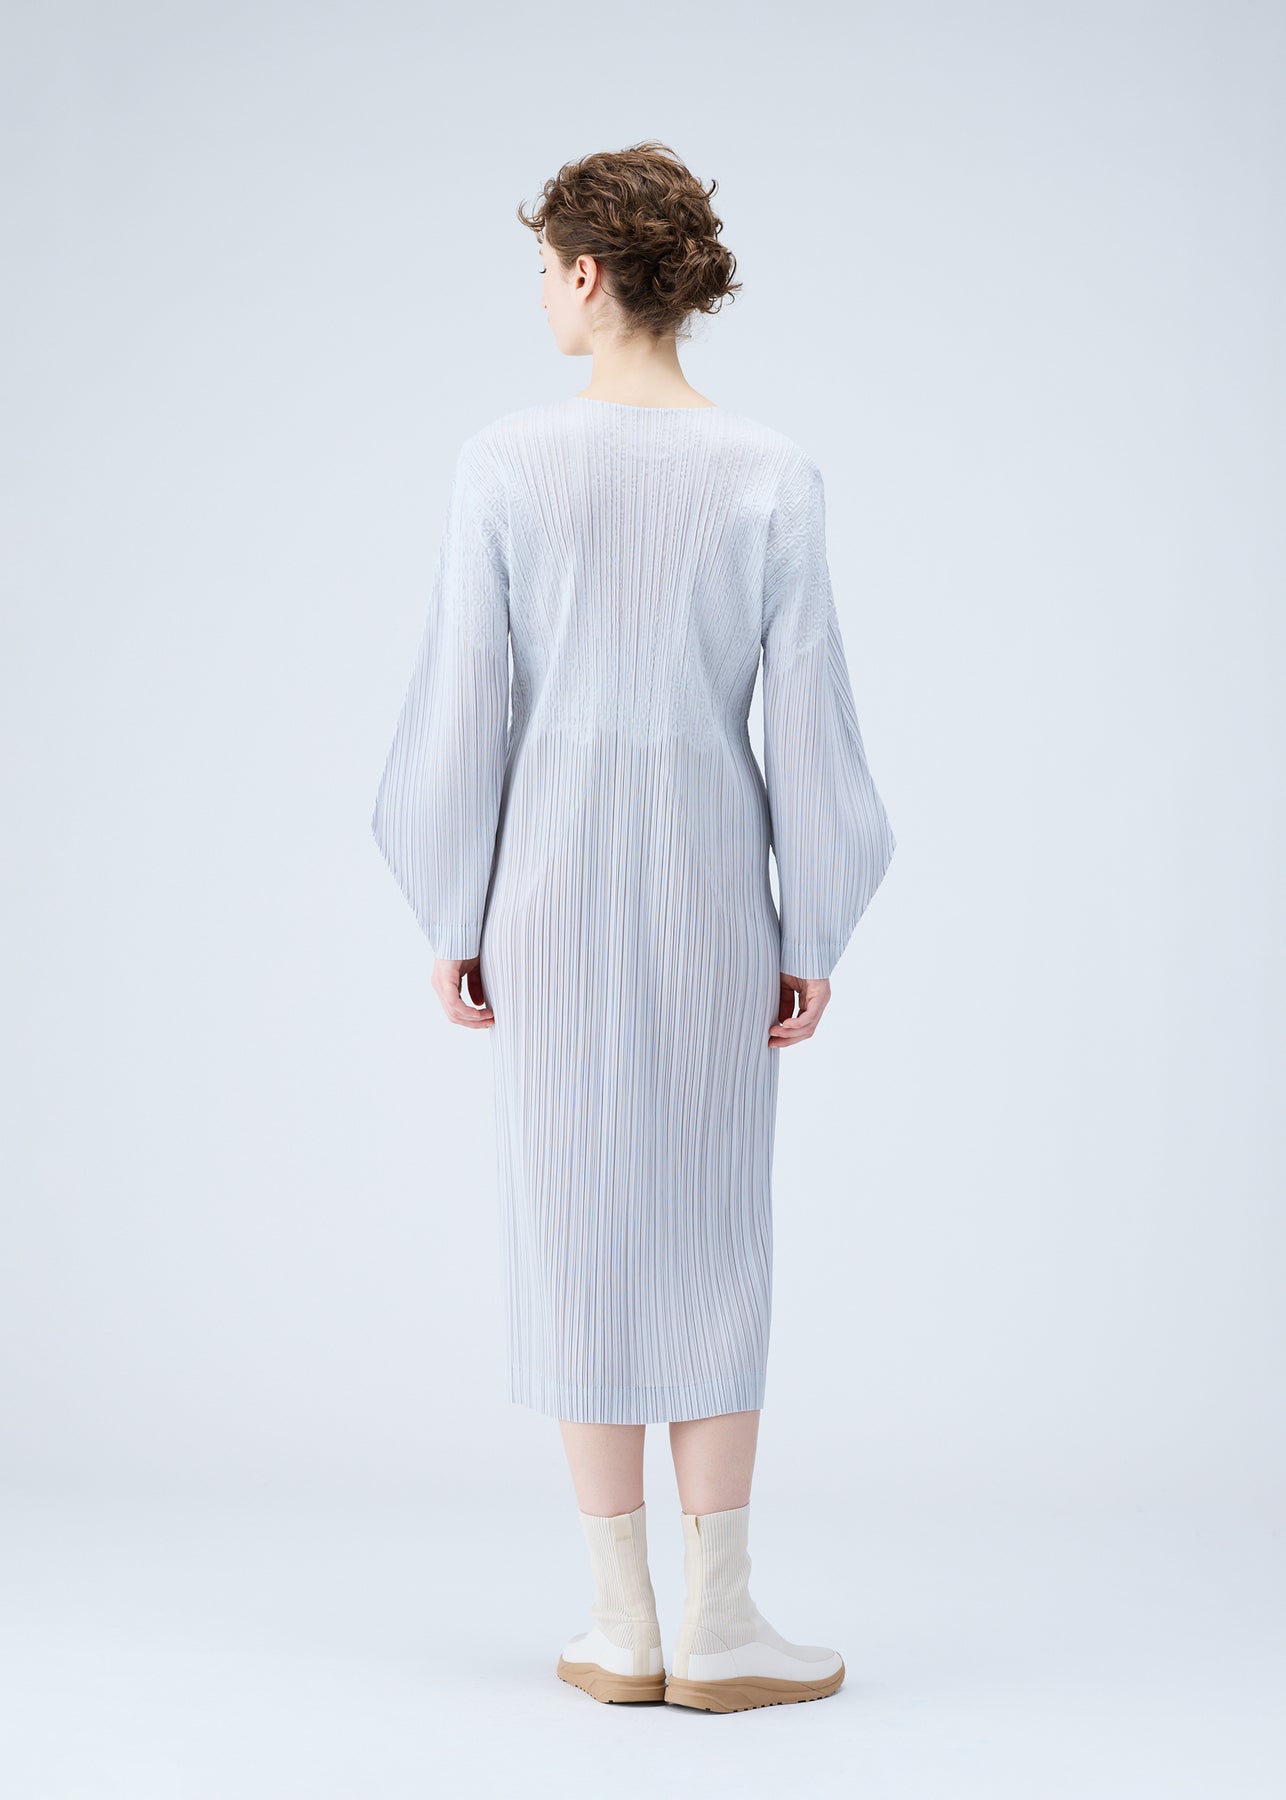 SNOWDROP DRESS | The official ISSEY MIYAKE ONLINE STORE | ISSEY